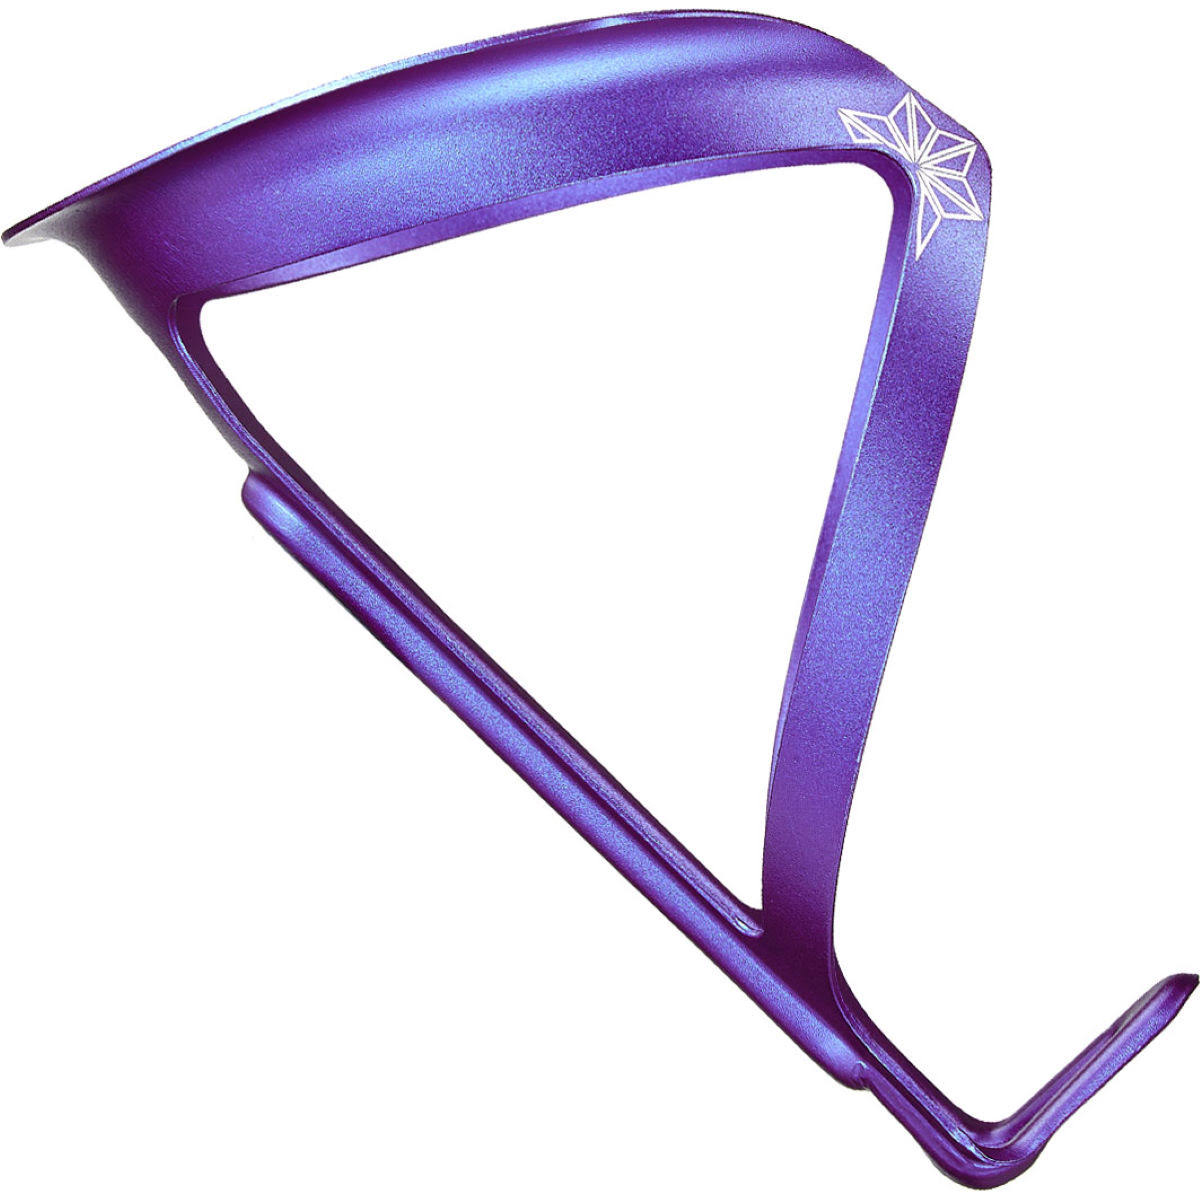 Supacaz Fly Cage Ano Bicycle Bottle Cage - 18g, Purple